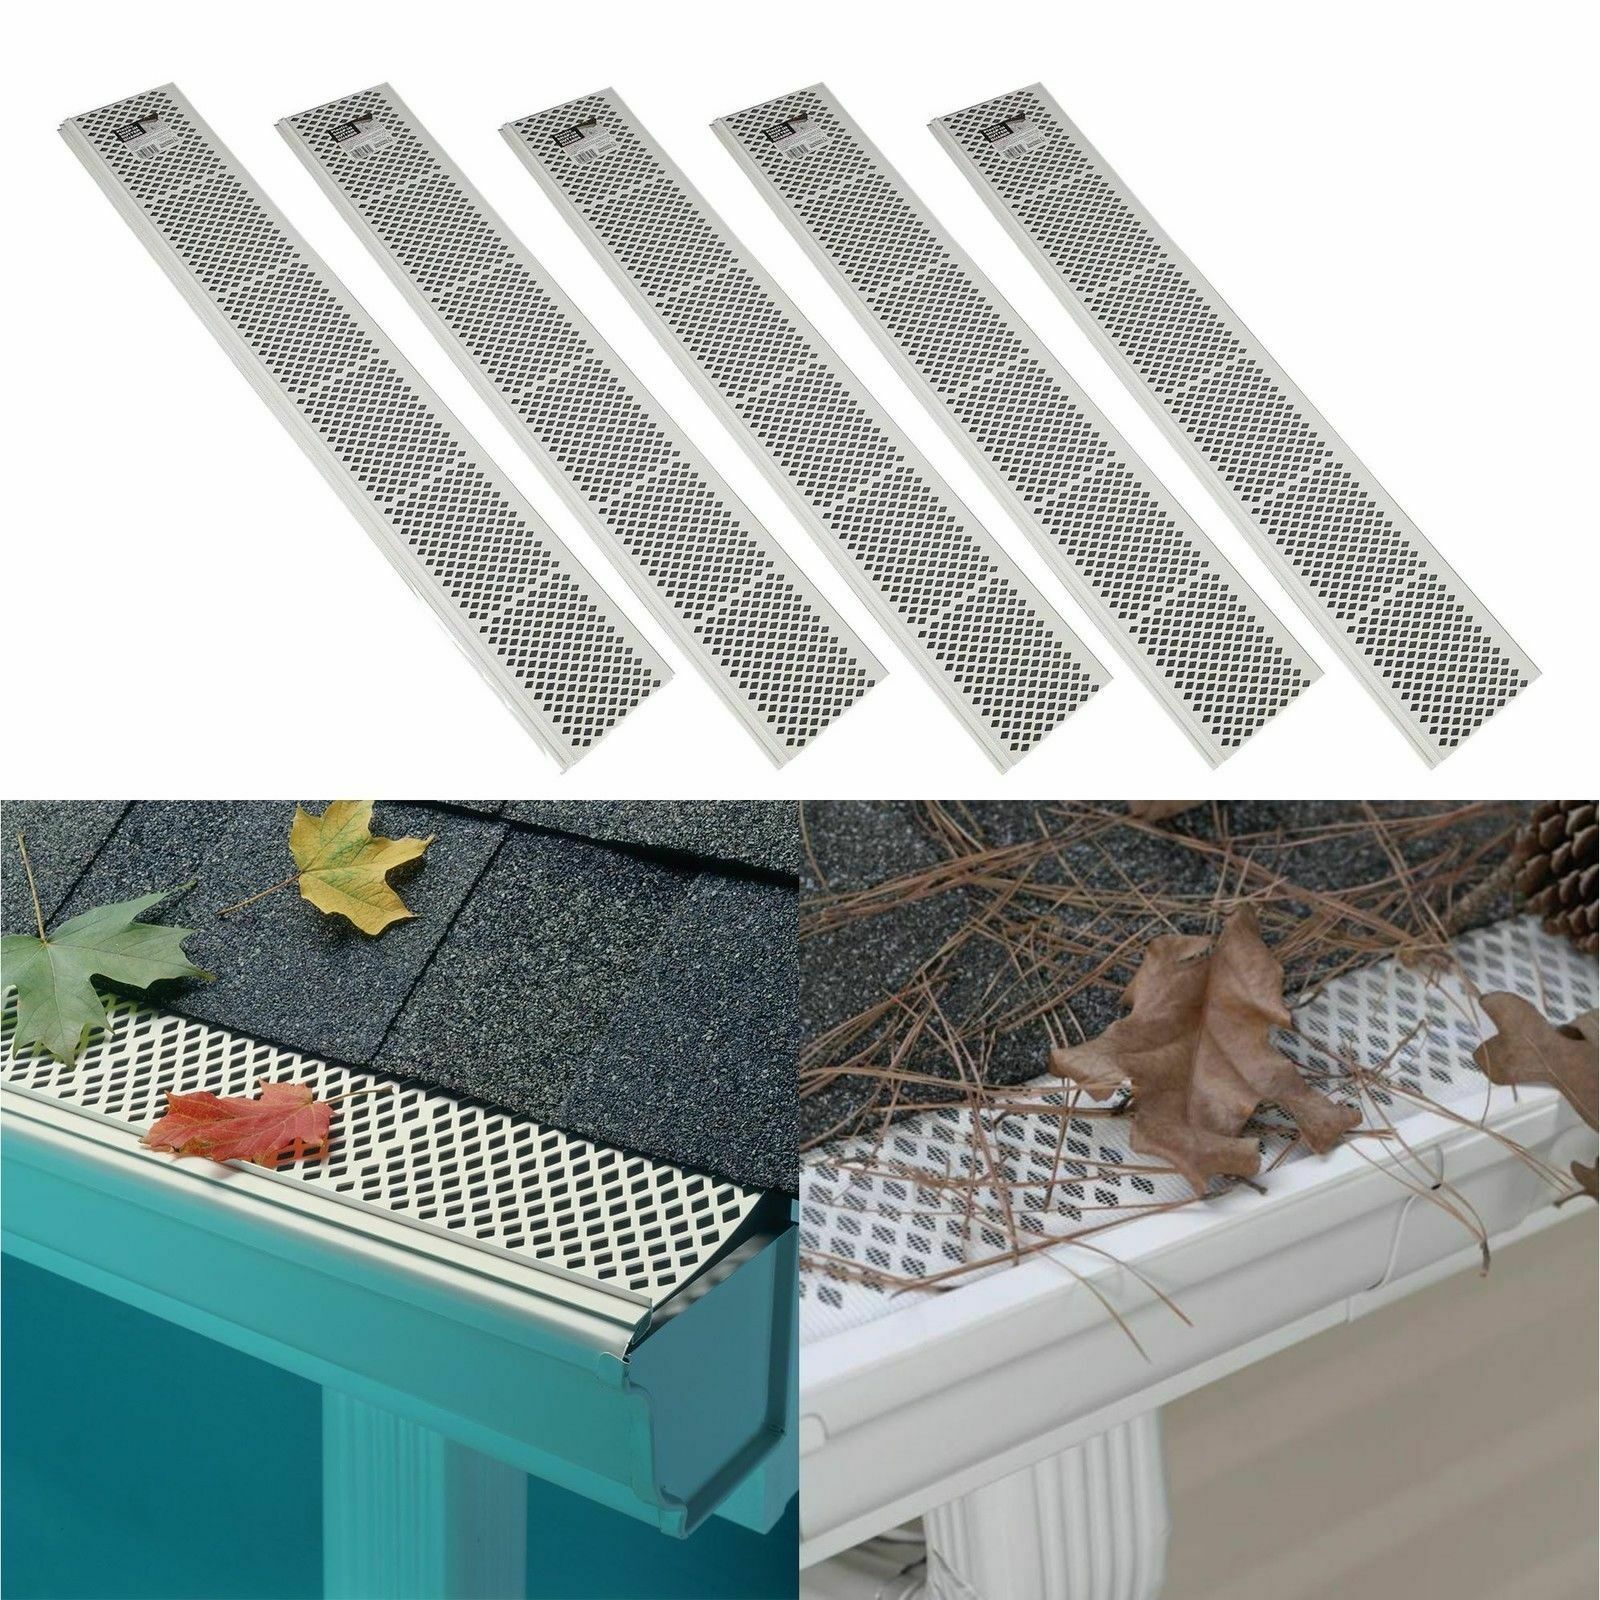 5 Pack Snap-in White Gutter Guard Cover 3ft Screen Filter Leaf Debris Protection